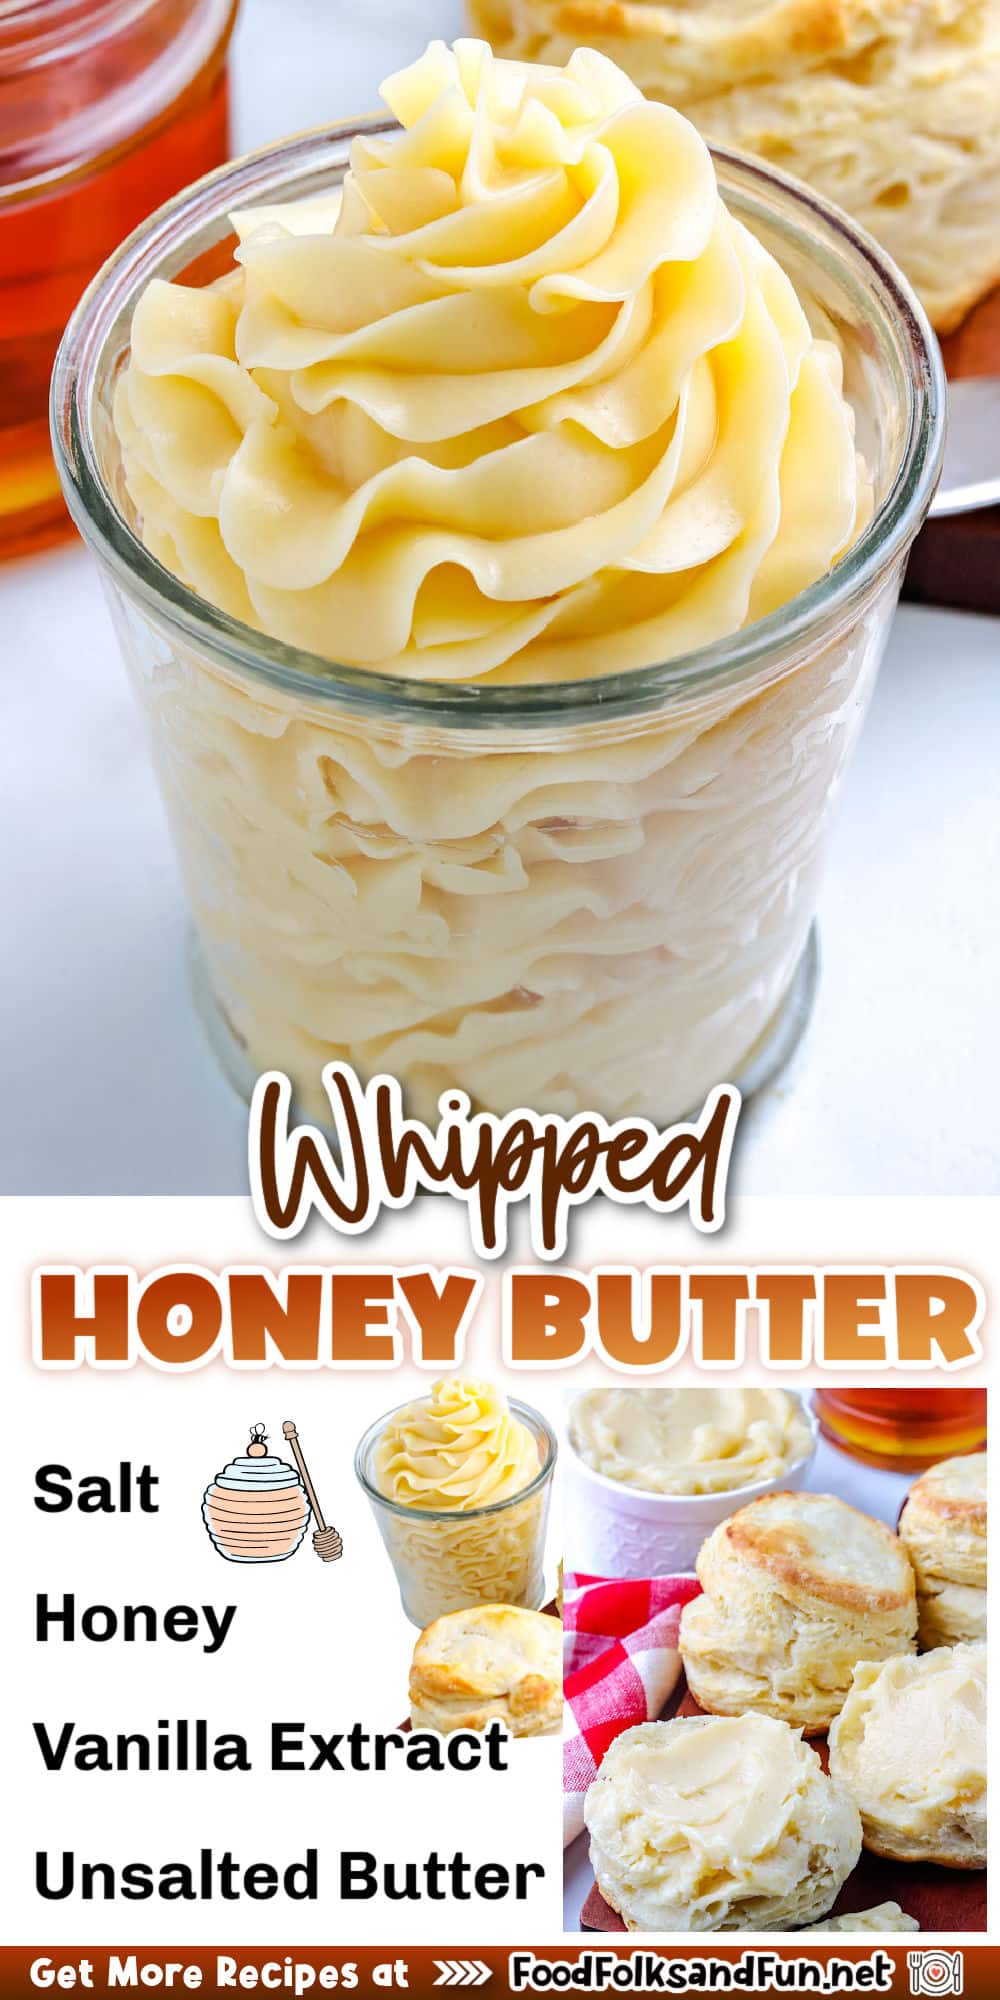 Amazingly quick and easy to prepare, this Whipped Honey Butter recipe is made in just 5 minutes. It’s perfect for topping biscuits, muffins, and homemade bread. via @foodfolksandfun